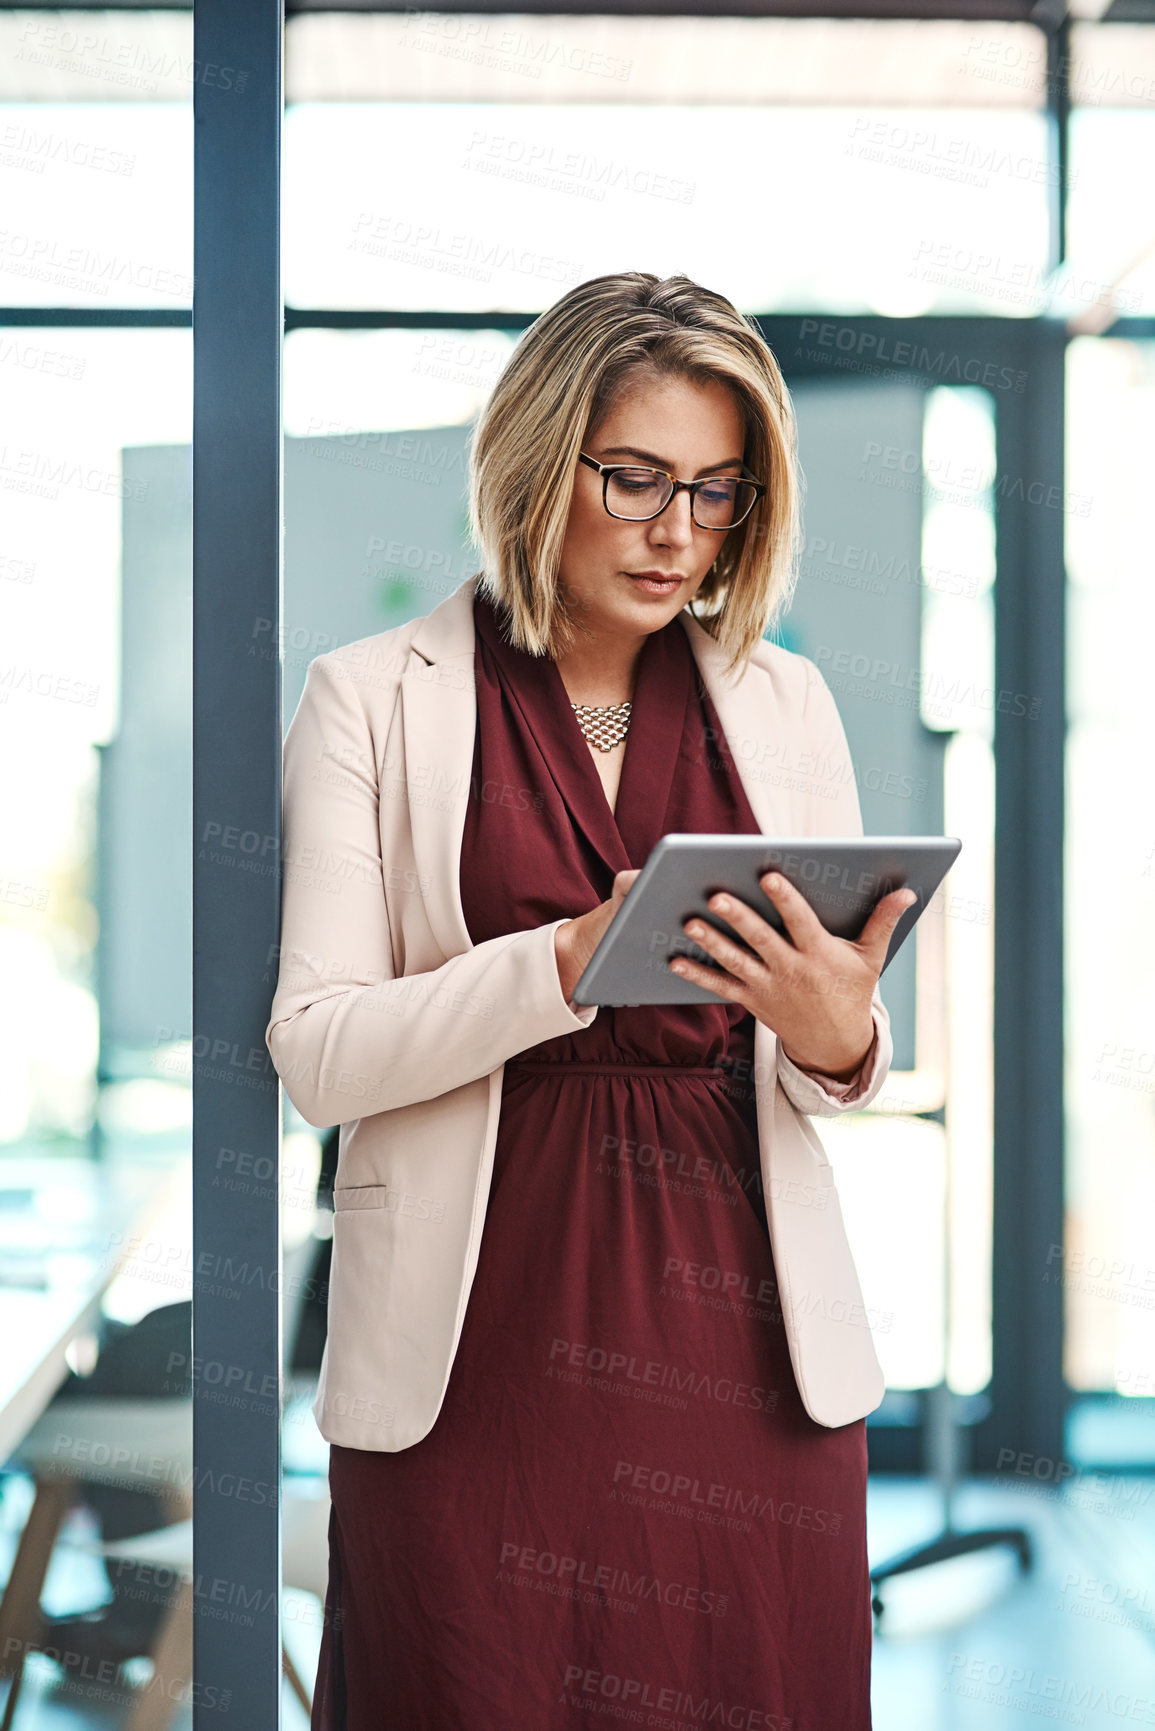 Buy stock photo Shot of a businesswoman using a digital tablet in an office